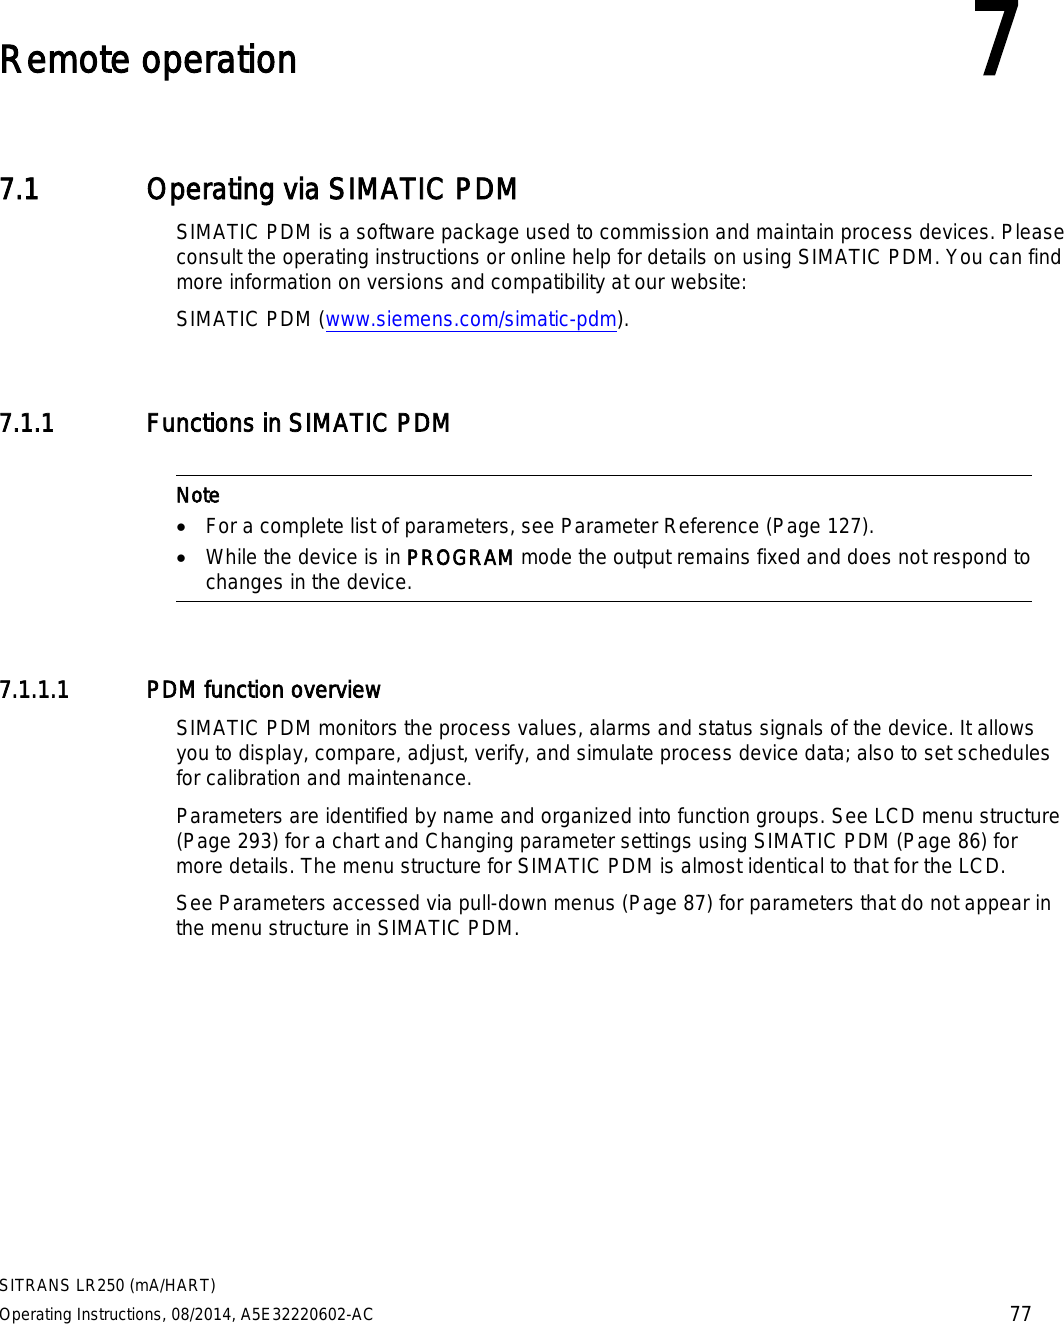  SITRANS LR250 (mA/HART) Operating Instructions, 08/2014, A5E32220602-AC 77  Remote operation 7 7.1 Operating via SIMATIC PDM SIMATIC PDM is a software package used to commission and maintain process devices. Please consult the operating instructions or online help for details on using SIMATIC PDM. You can find more information on versions and compatibility at our website: SIMATIC PDM (www.siemens.com/simatic-pdm). 7.1.1 Functions in SIMATIC PDM   Note • For a complete list of parameters, see Parameter Reference (Page 127). • While the device is in PROGRAM mode the output remains fixed and does not respond to changes in the device.  7.1.1.1 PDM function overview SIMATIC PDM monitors the process values, alarms and status signals of the device. It allows you to display, compare, adjust, verify, and simulate process device data; also to set schedules for calibration and maintenance. Parameters are identified by name and organized into function groups. See LCD menu structure (Page 293) for a chart and Changing parameter settings using SIMATIC PDM (Page 86) for more details. The menu structure for SIMATIC PDM is almost identical to that for the LCD. See Parameters accessed via pull-down menus (Page 87) for parameters that do not appear in the menu structure in SIMATIC PDM.  